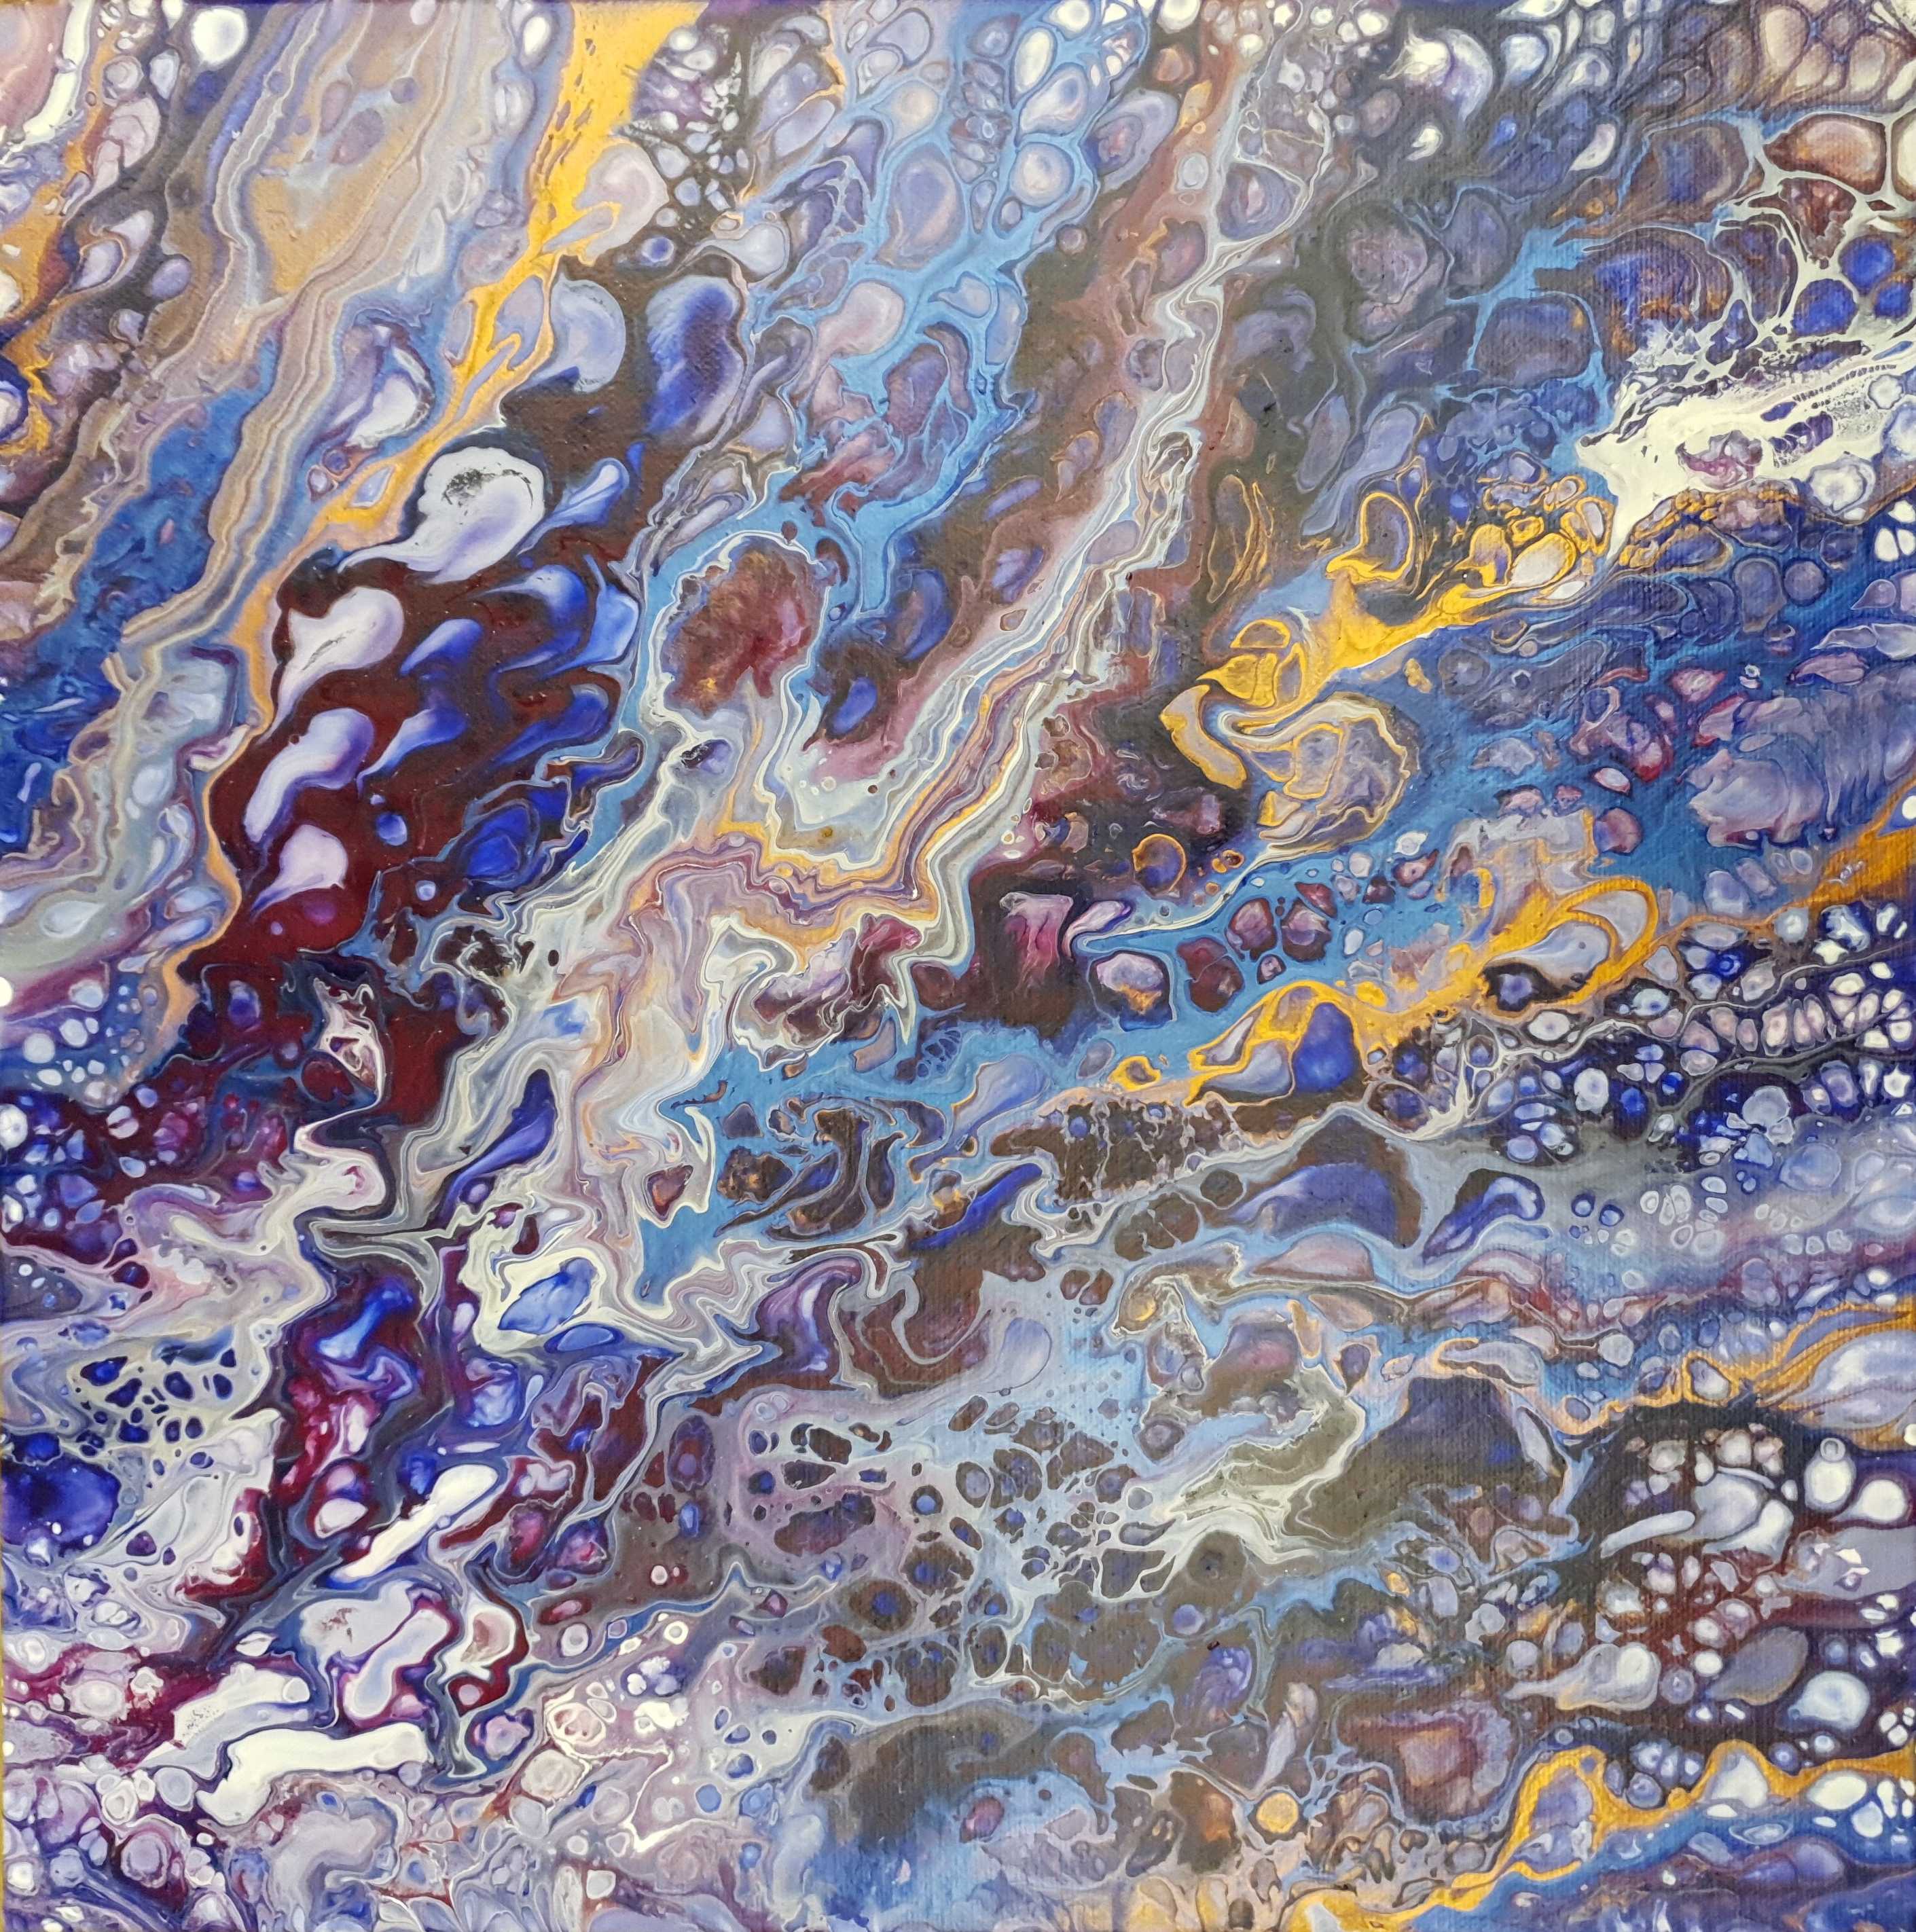 Abstract art inspired by Hubble telescope pictures